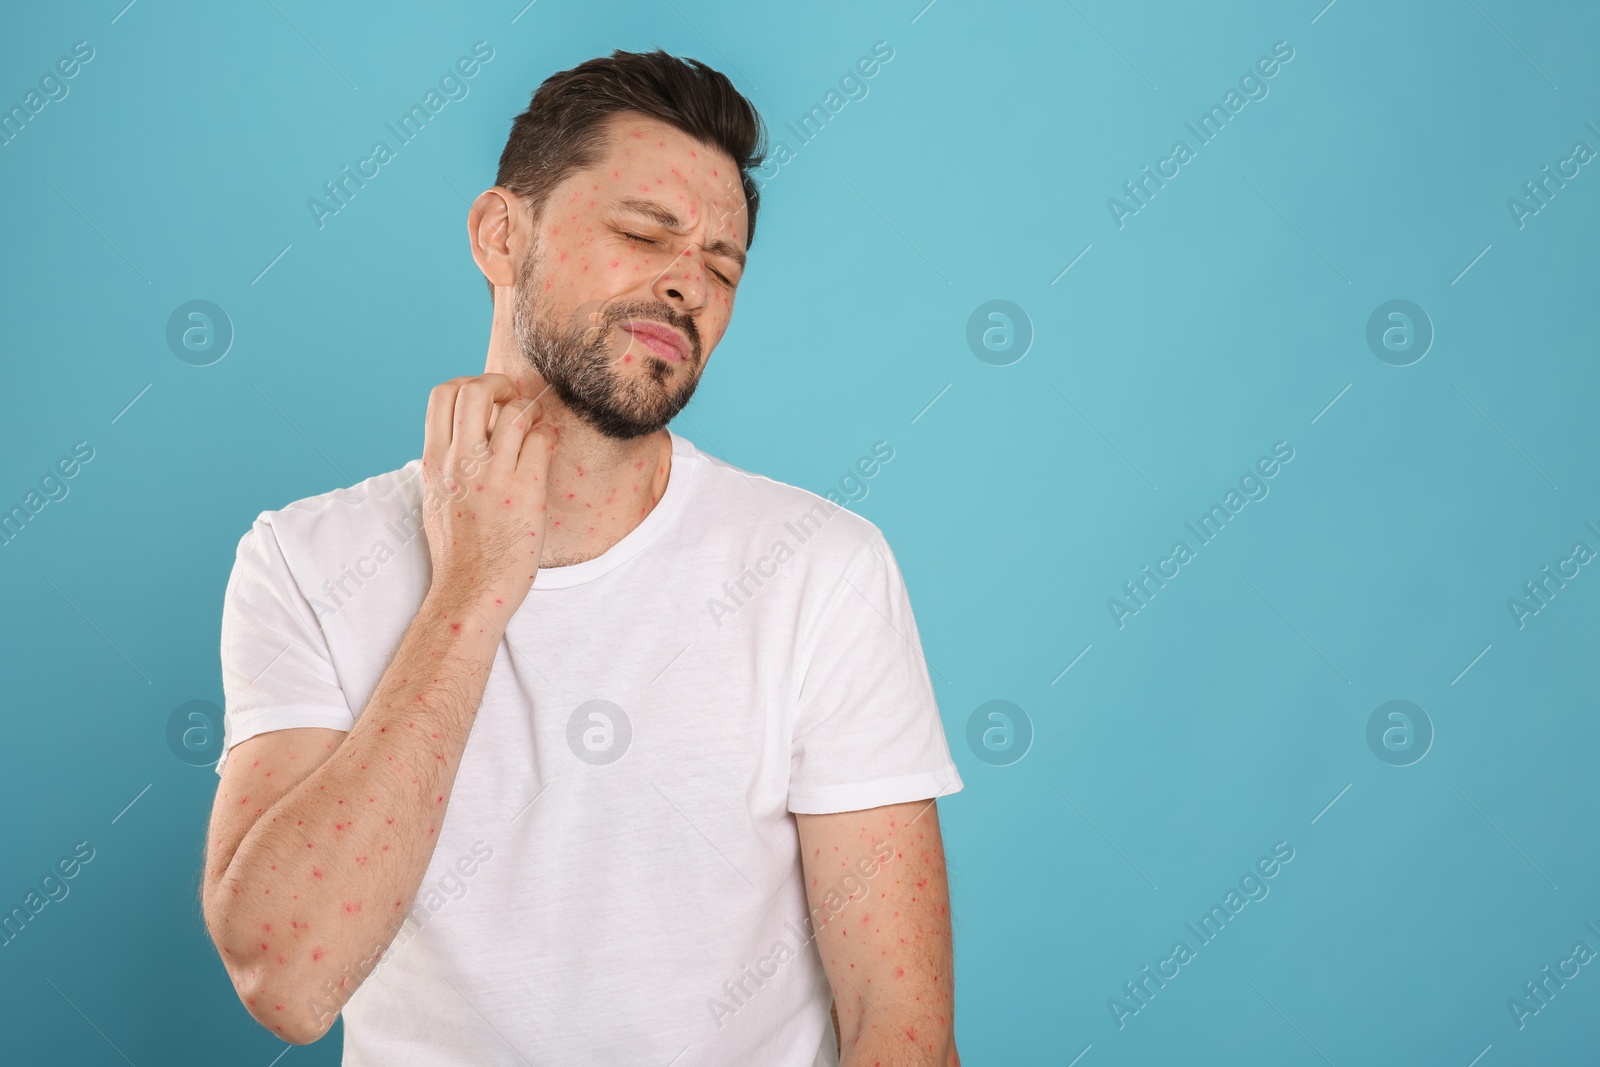 Photo of Man with rash suffering from monkeypox virus on light blue background. Space for text